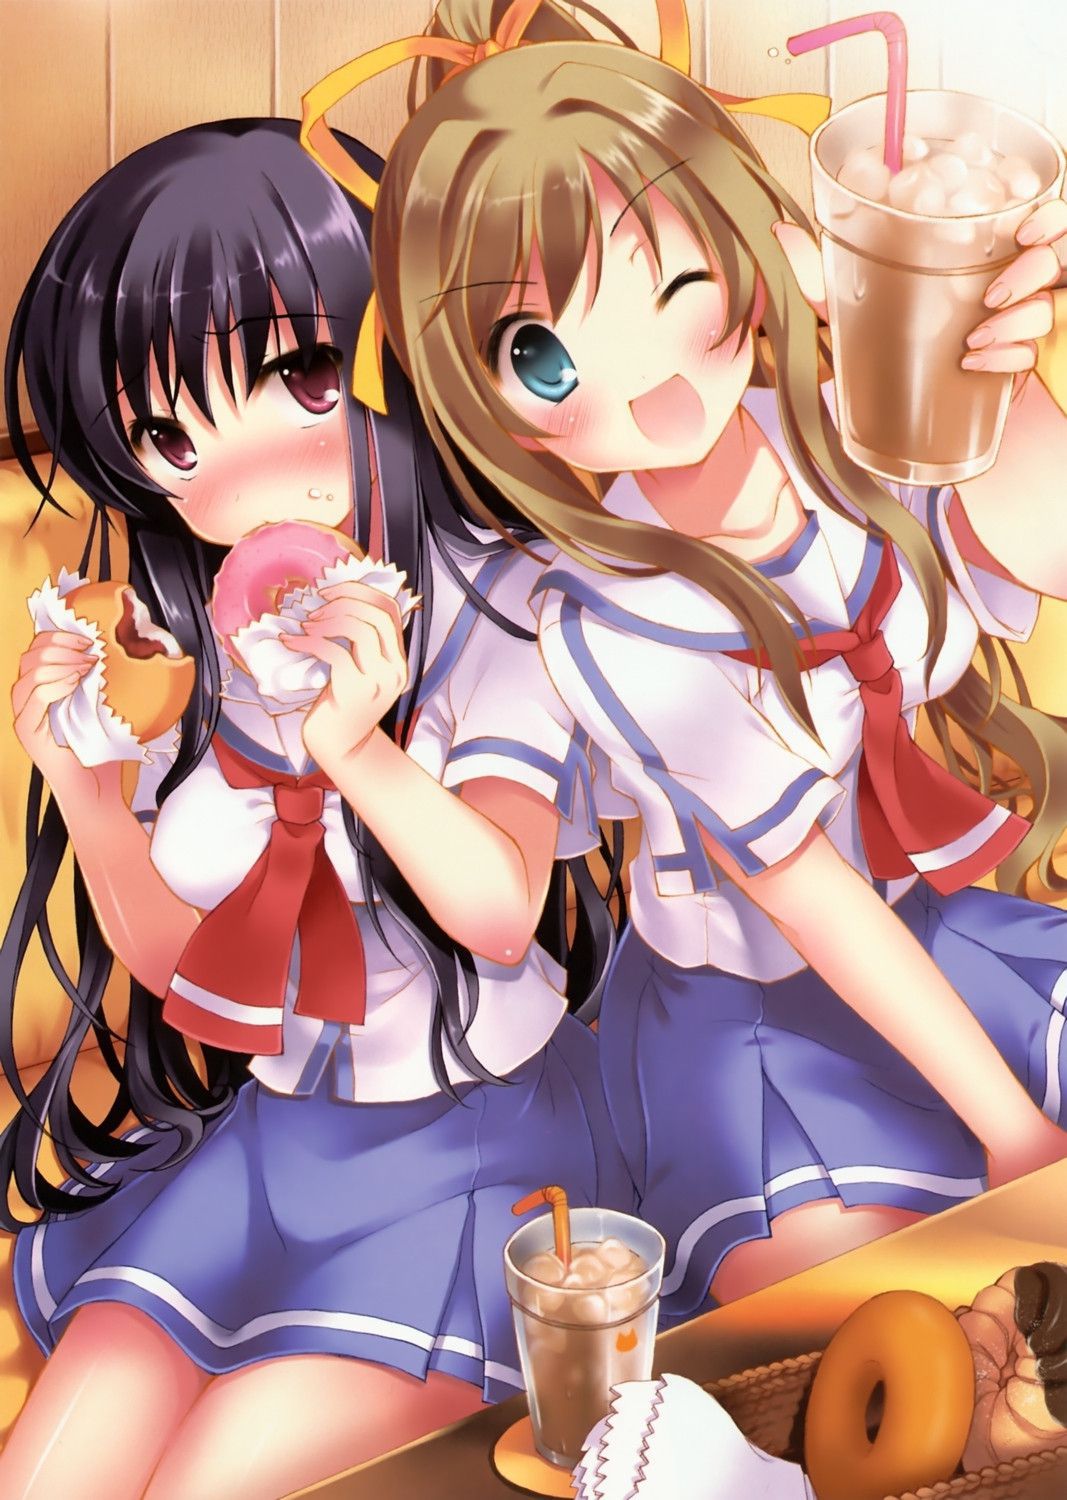 Secondary image summary of the girl eating delicious food! 14